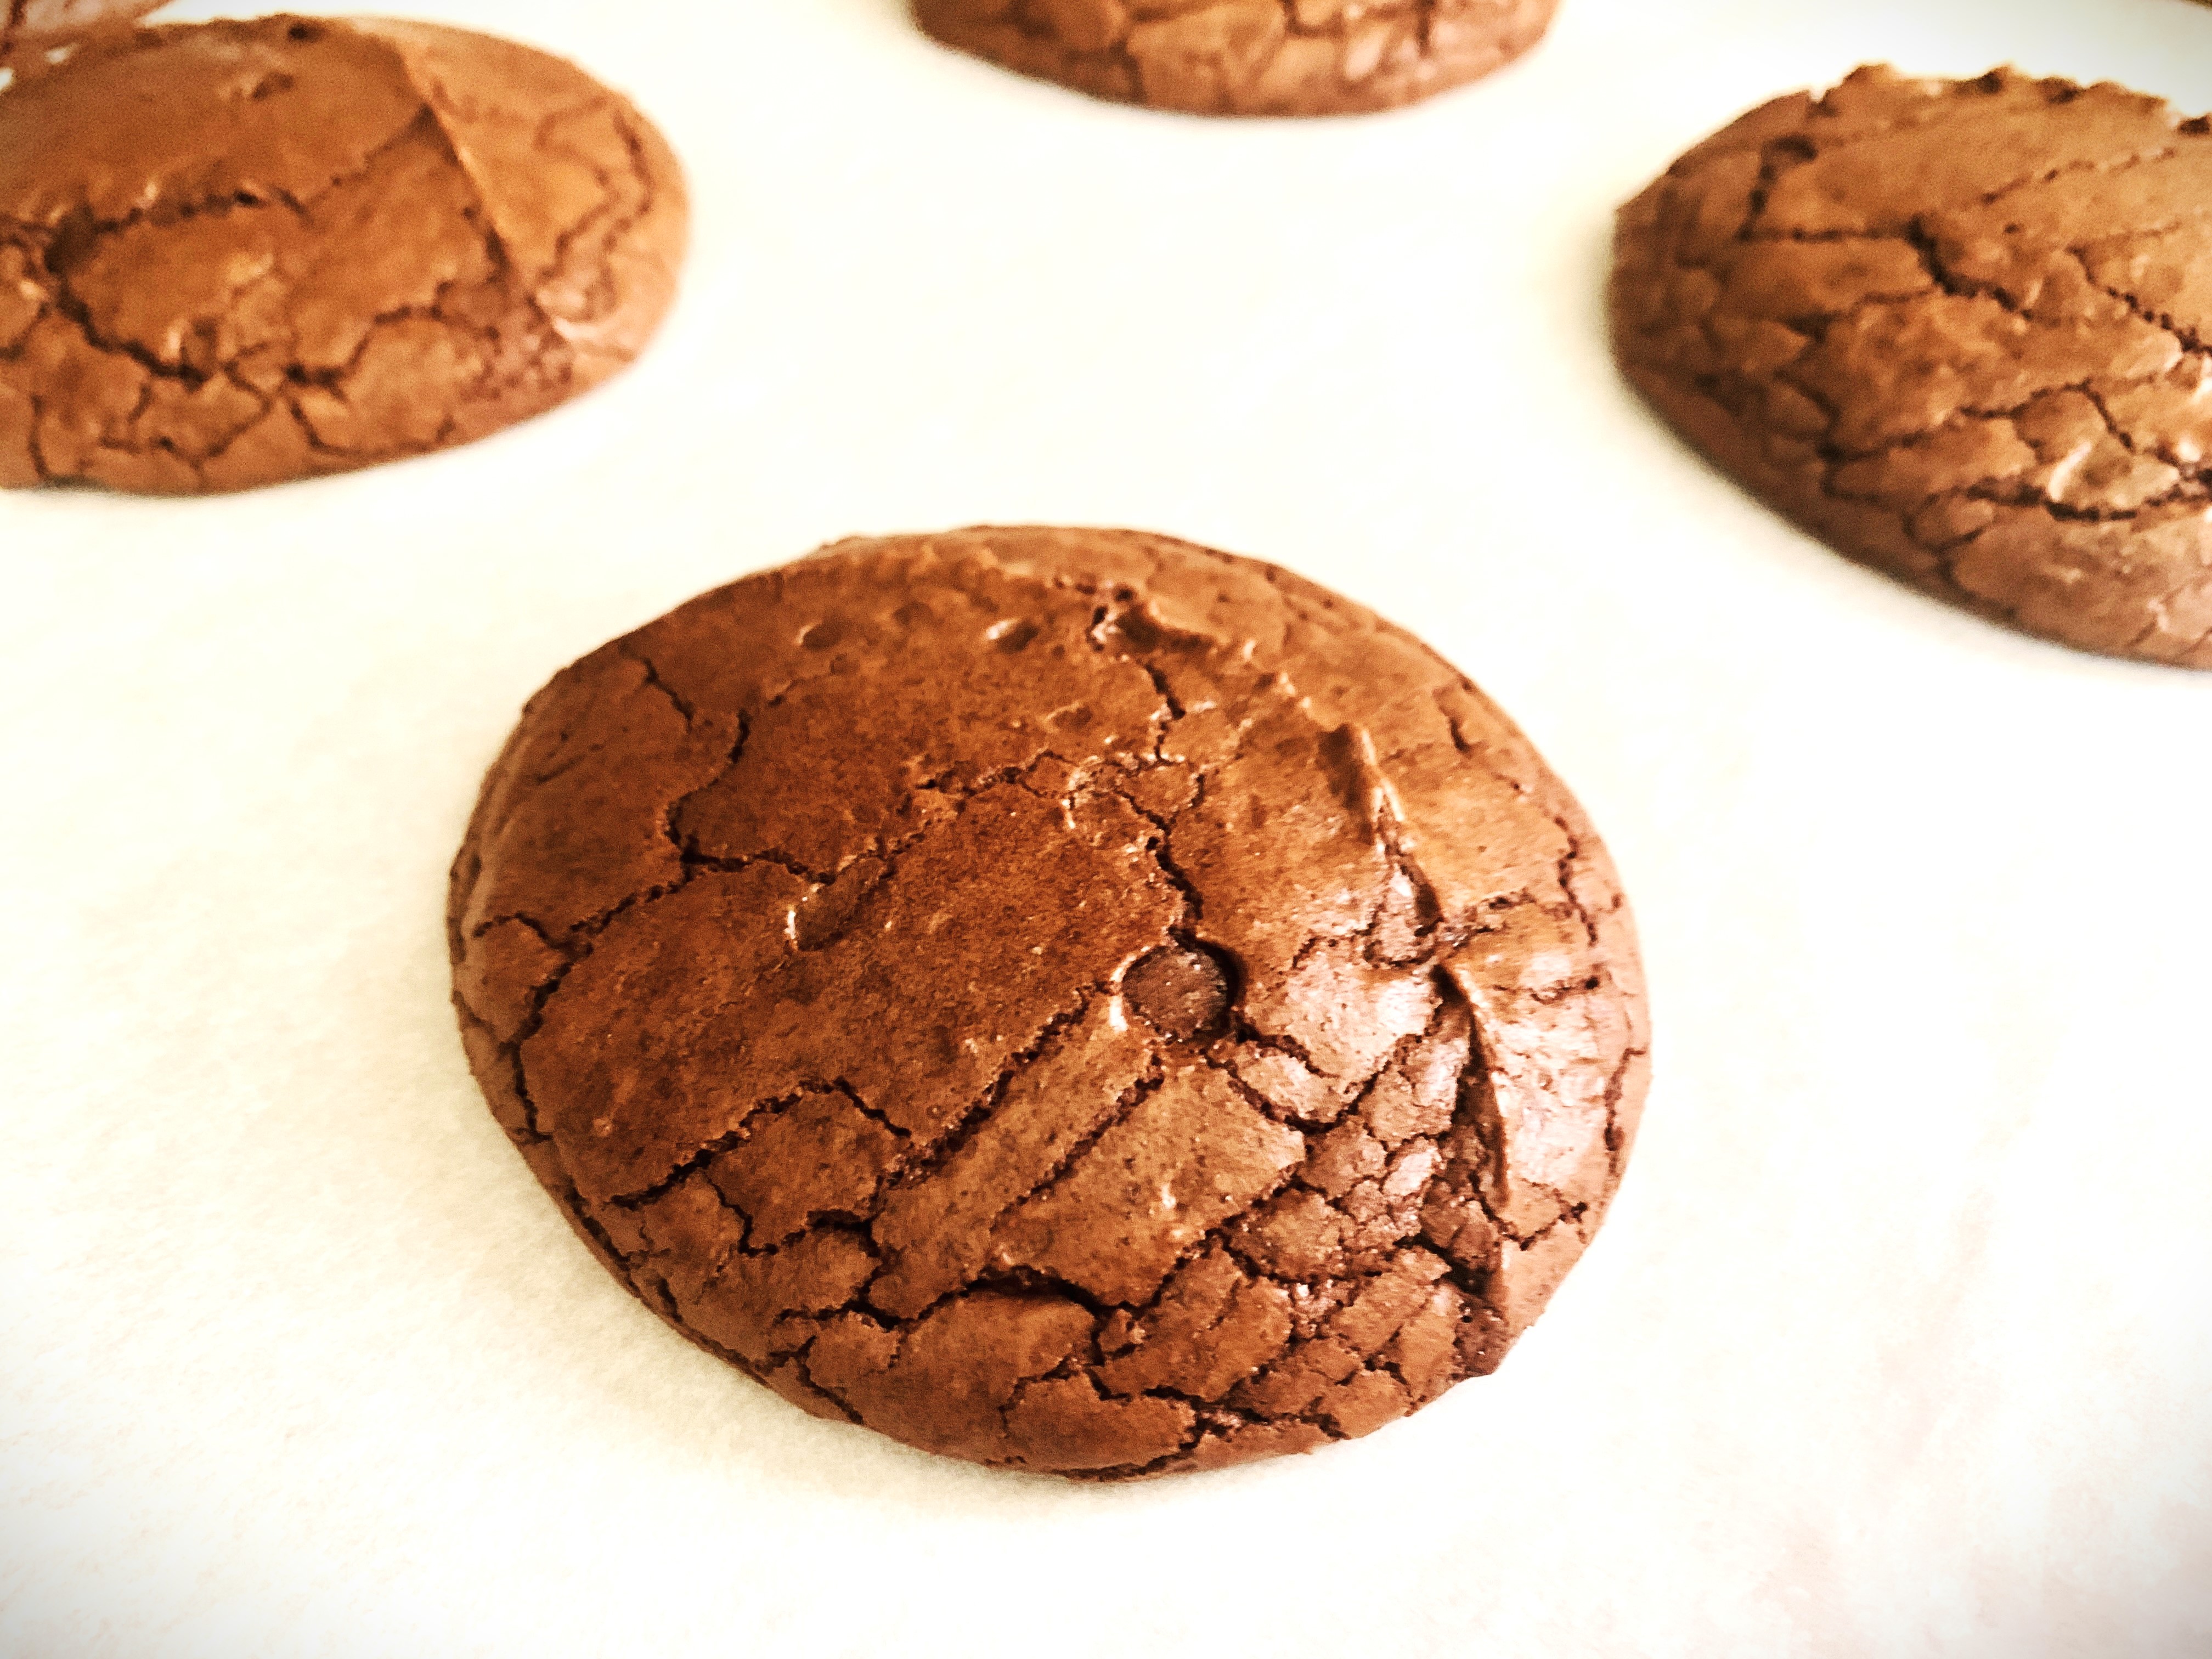 https://genabell.com/wp-content/uploads/2022/09/09-22-Brown-Butter-Chocolate-Brownie-Cookie-004.jpg